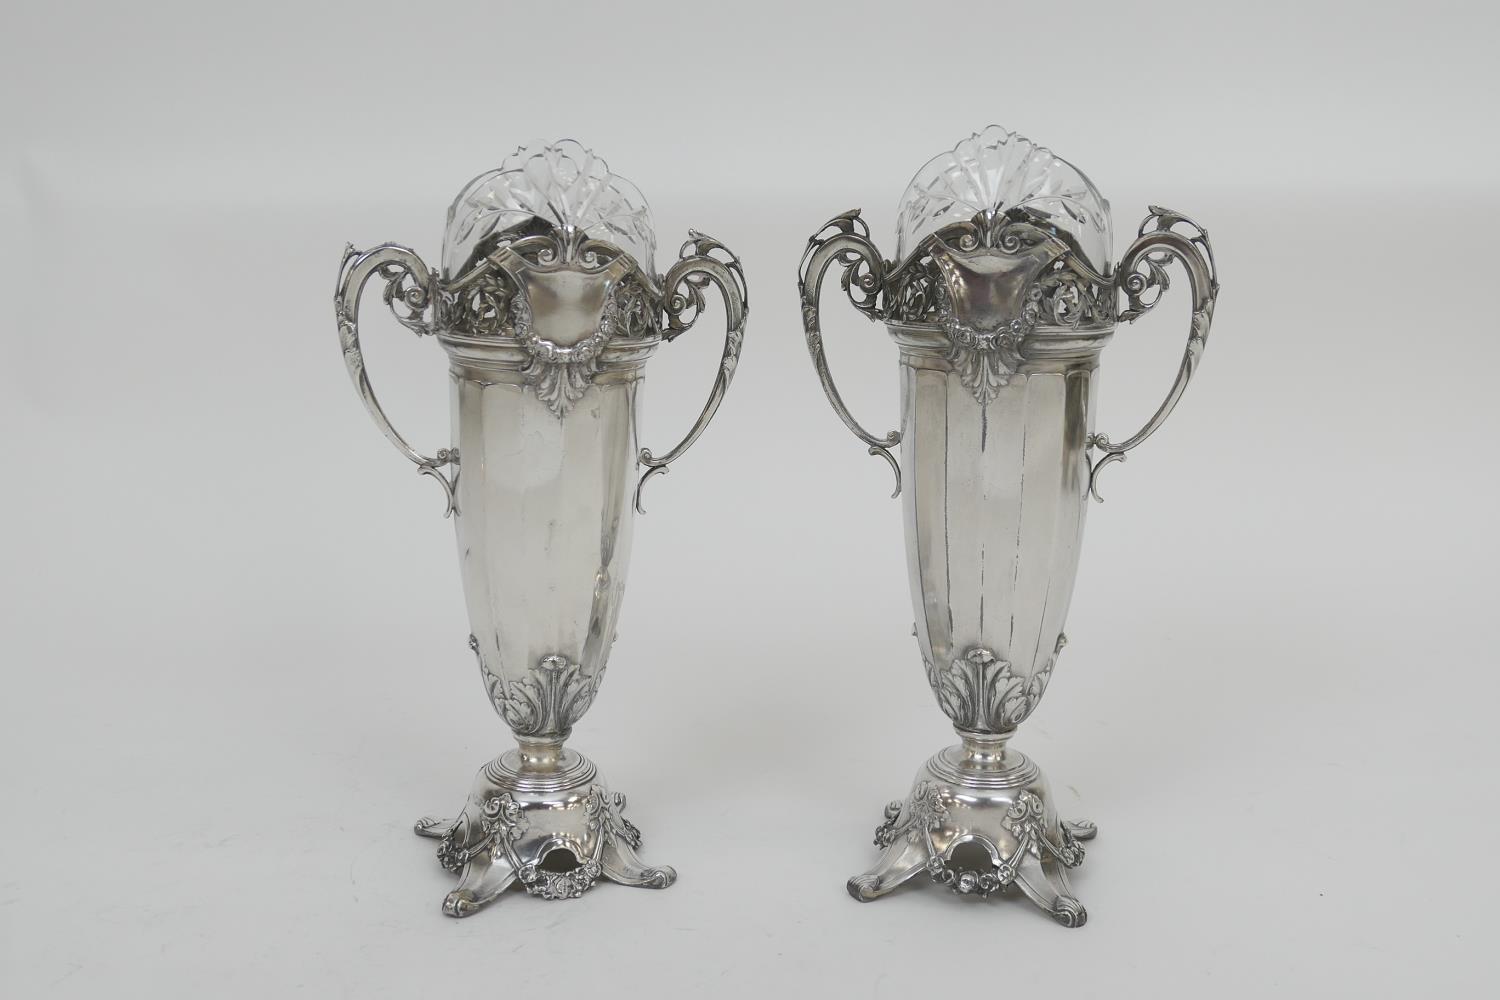 Pair of Kaiser silver plated vases, circa 1910, each having a cut and shaped glass liner, with